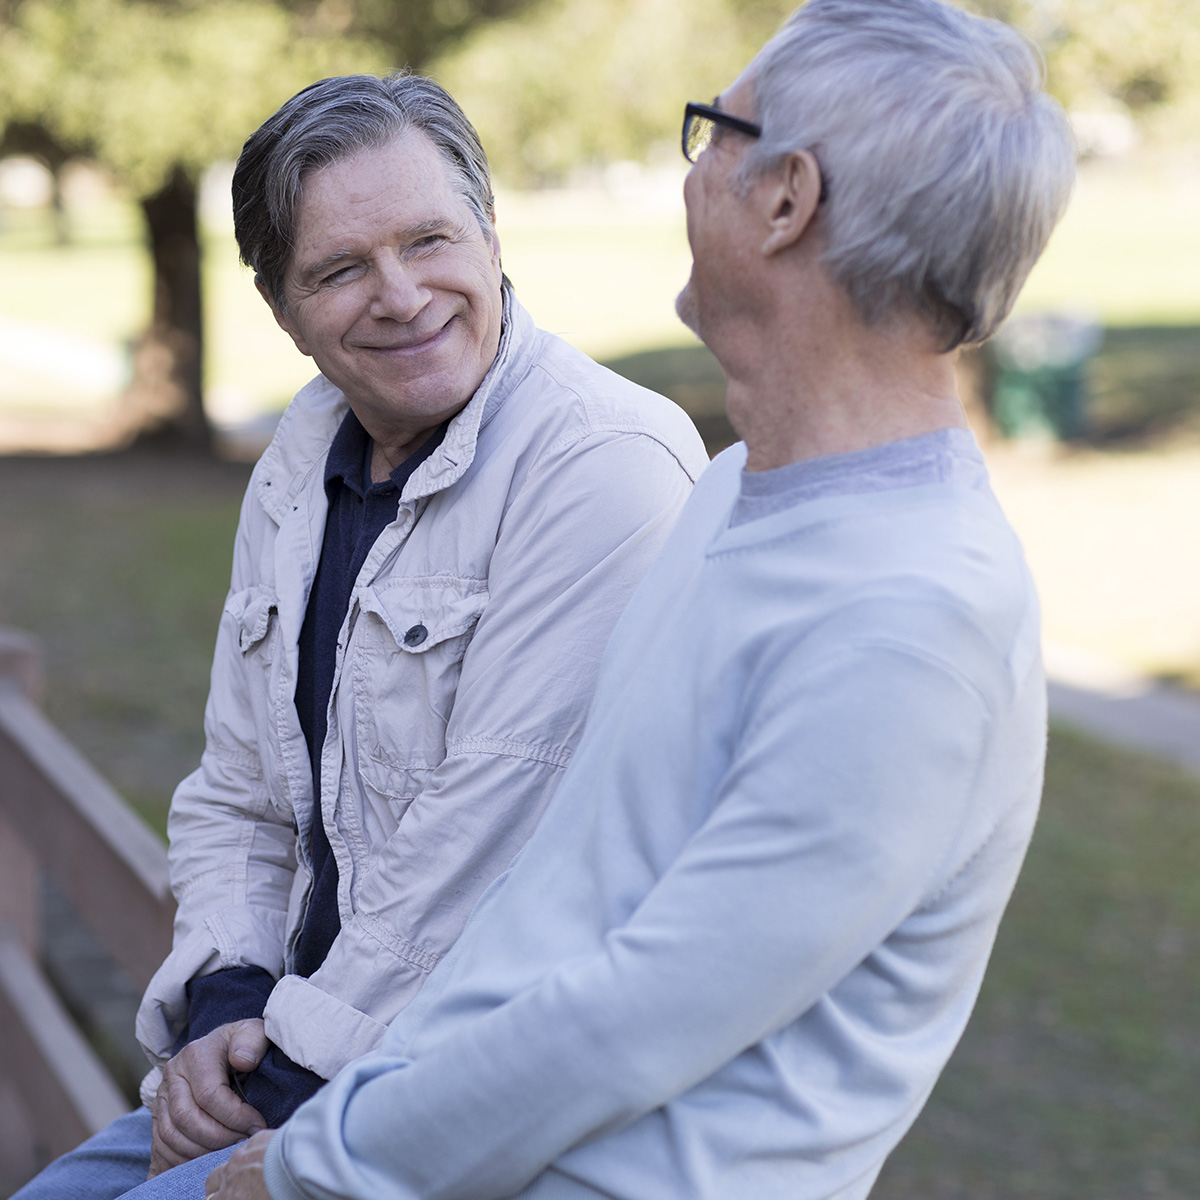 Two gentleman sitting on a park bench enjoying conversation and each other’s company.